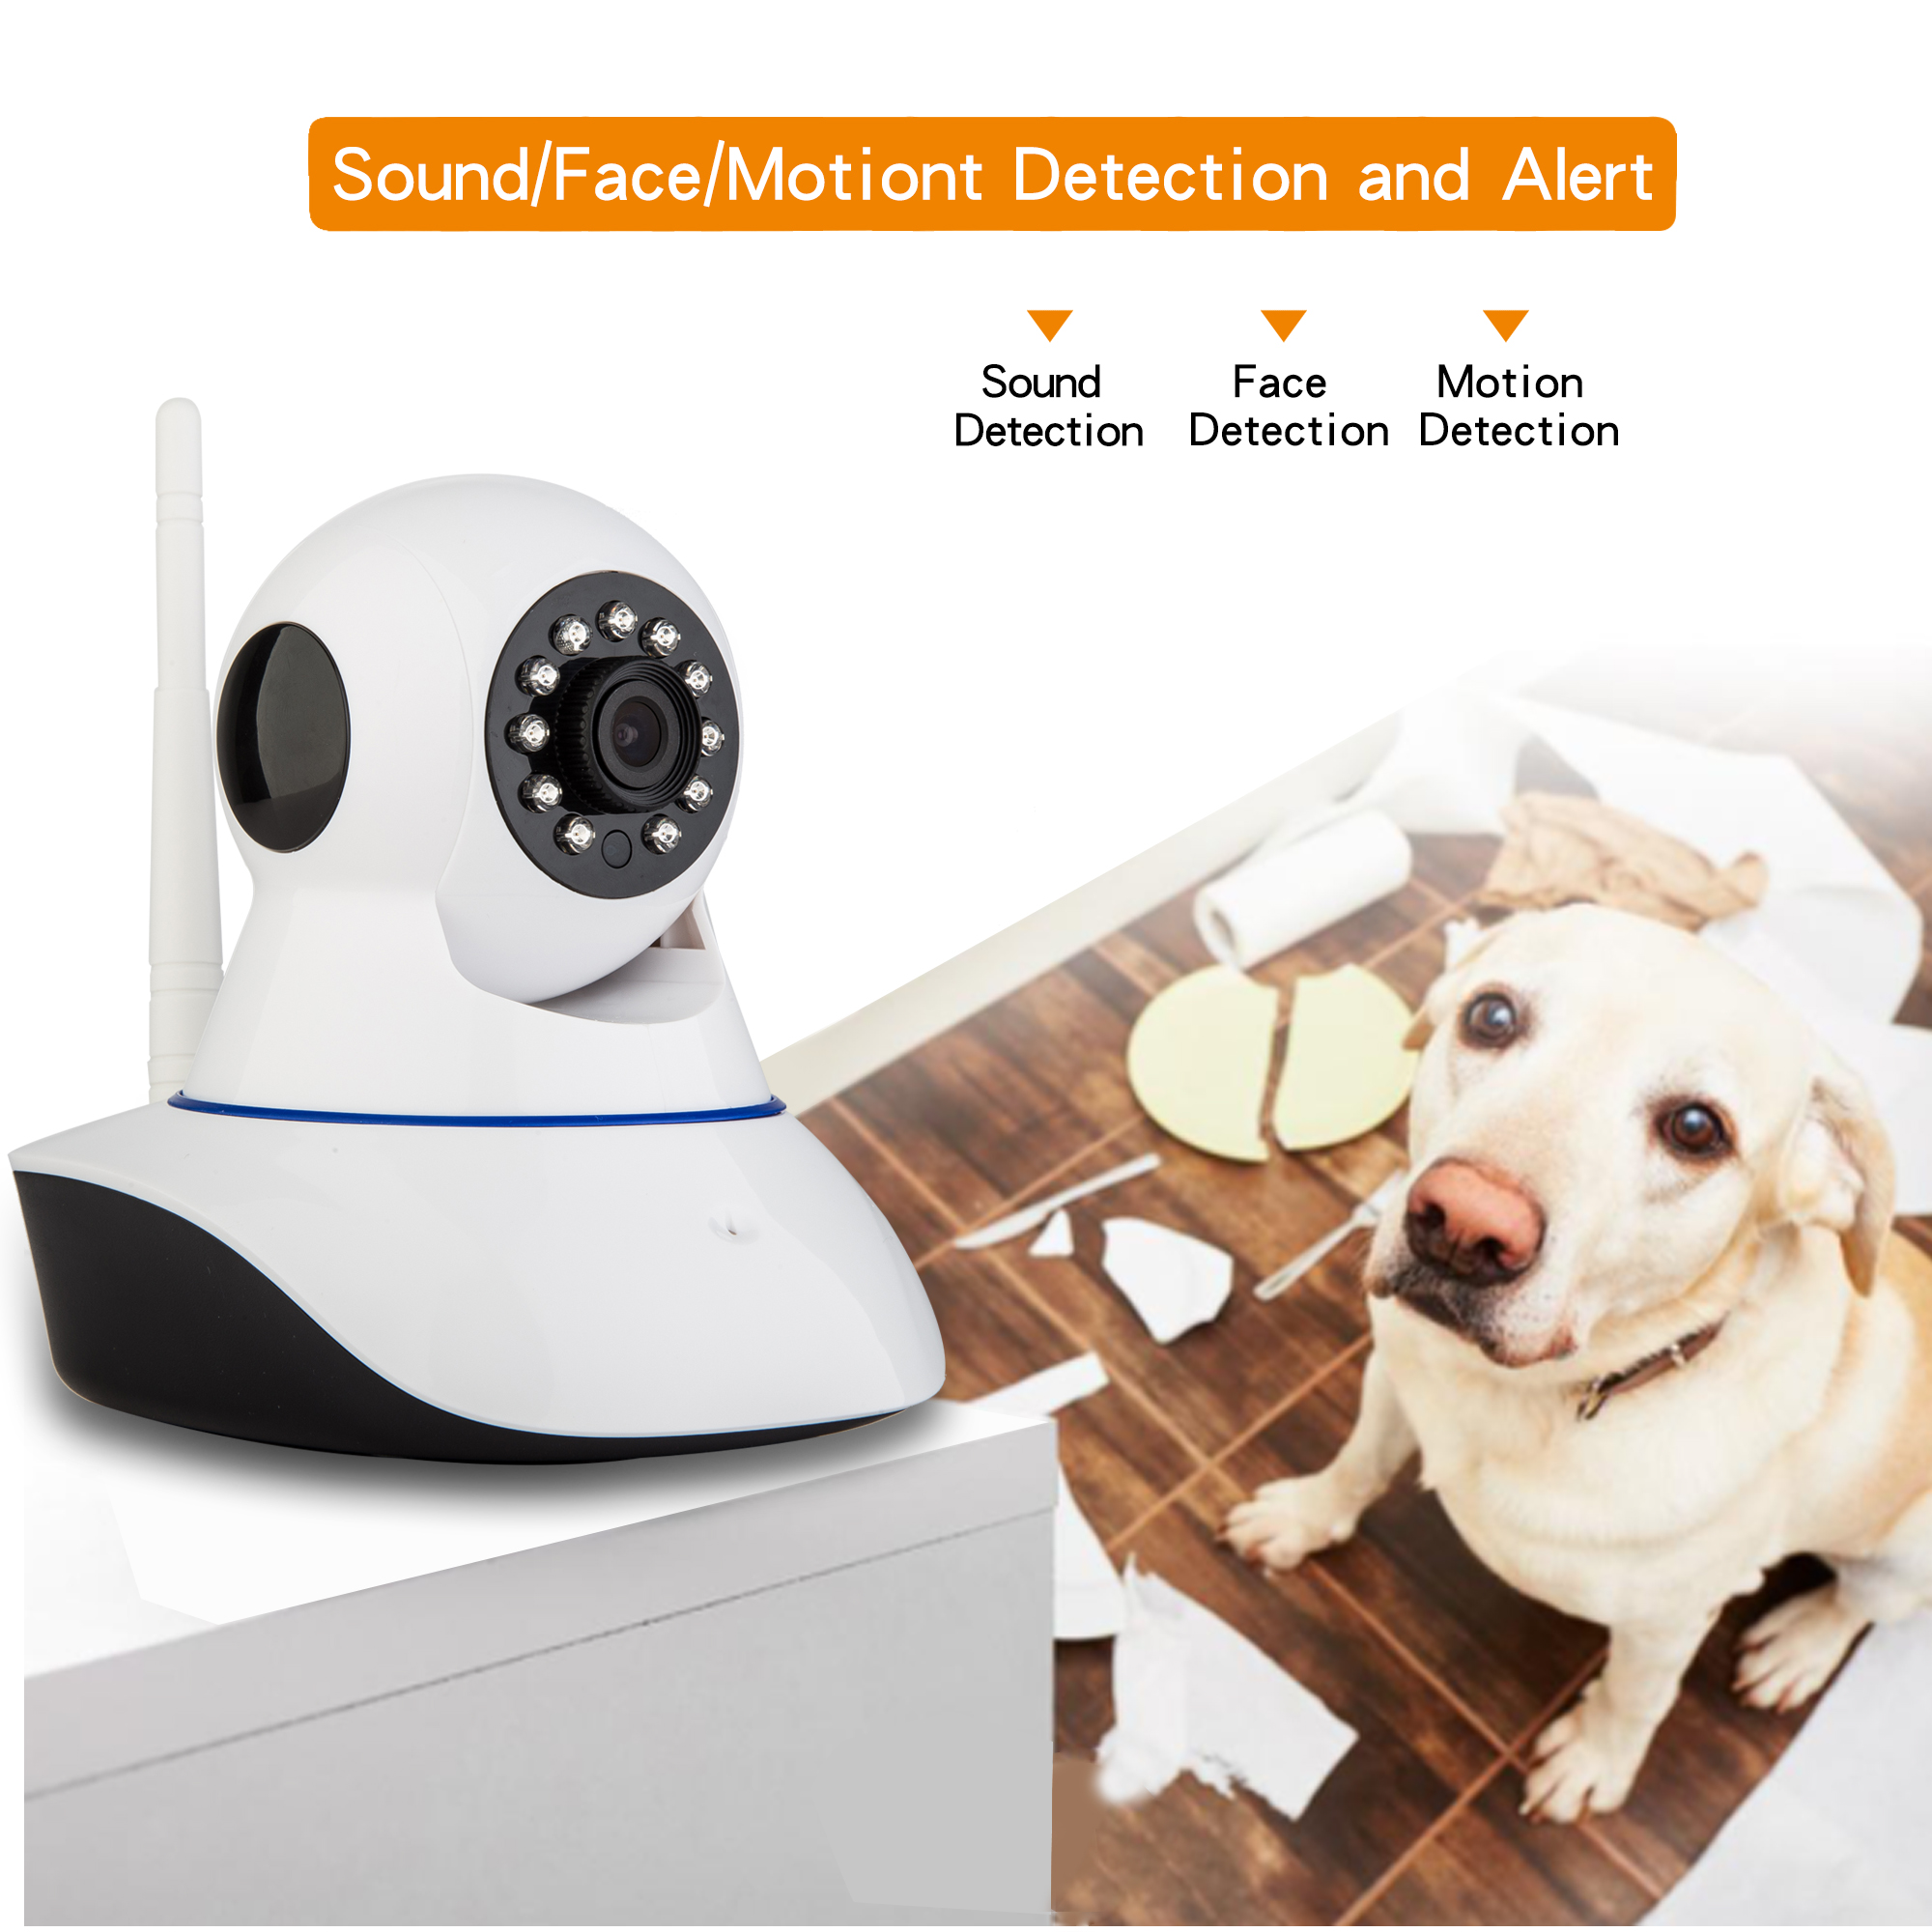 Cheapest Made in China Outdoor Security Surveillance Camera 1080P HD IR Night Vision Full Color Night Vision Camera